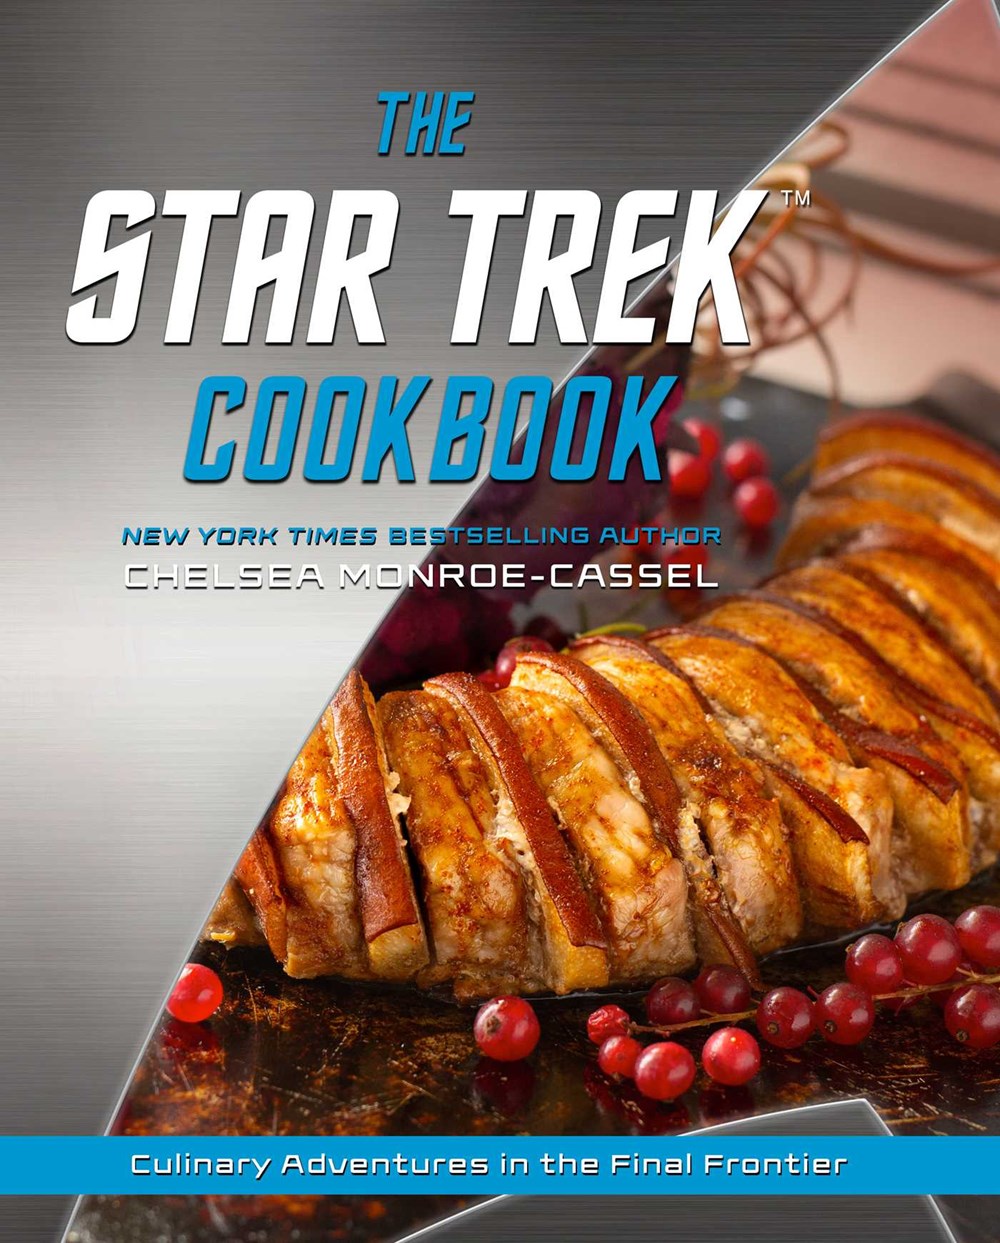 The front cover for "The Star Trek Cookbook: Culinary Adventures in the Final Frontier" by Chelsea Monroe-Cassel.